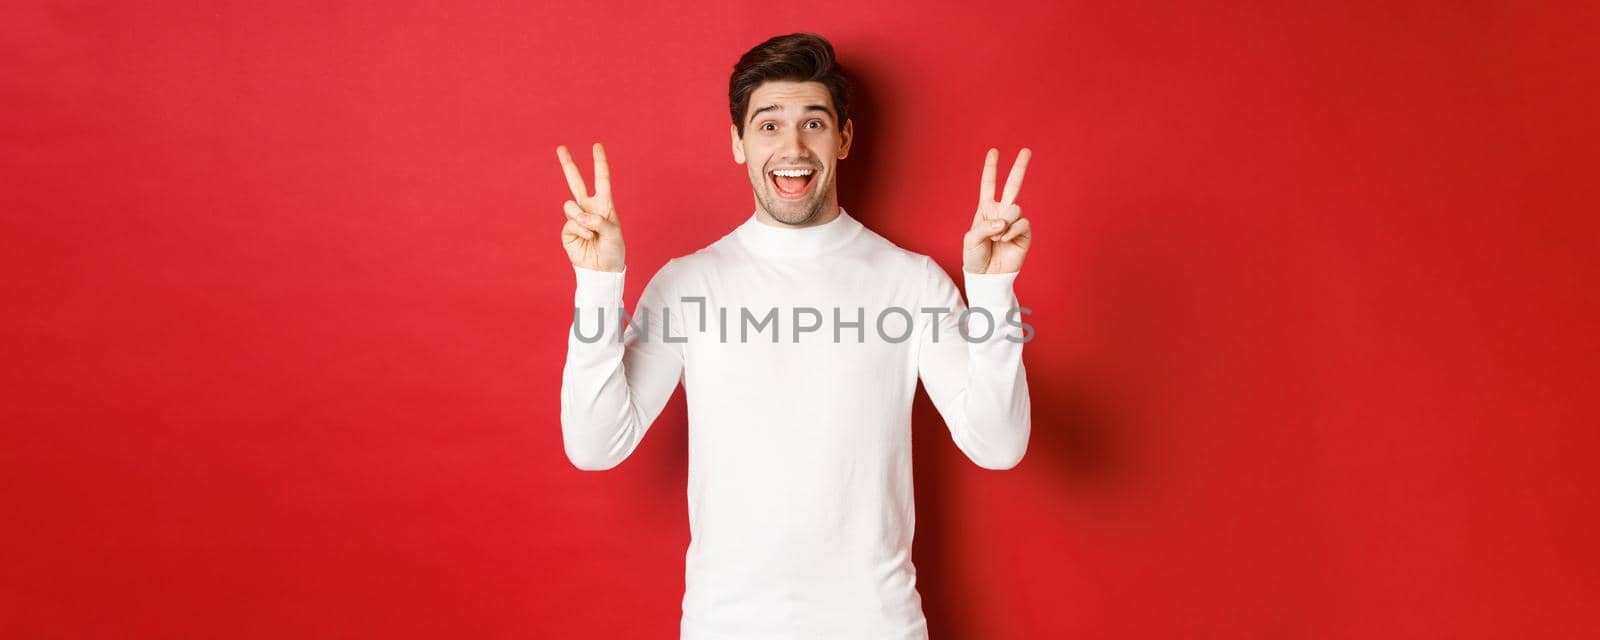 Concept of winter holidays, christmas and lifestyle. Handsome funny guy in white sweater, showing peace signs and smiling happy, standing against red background.